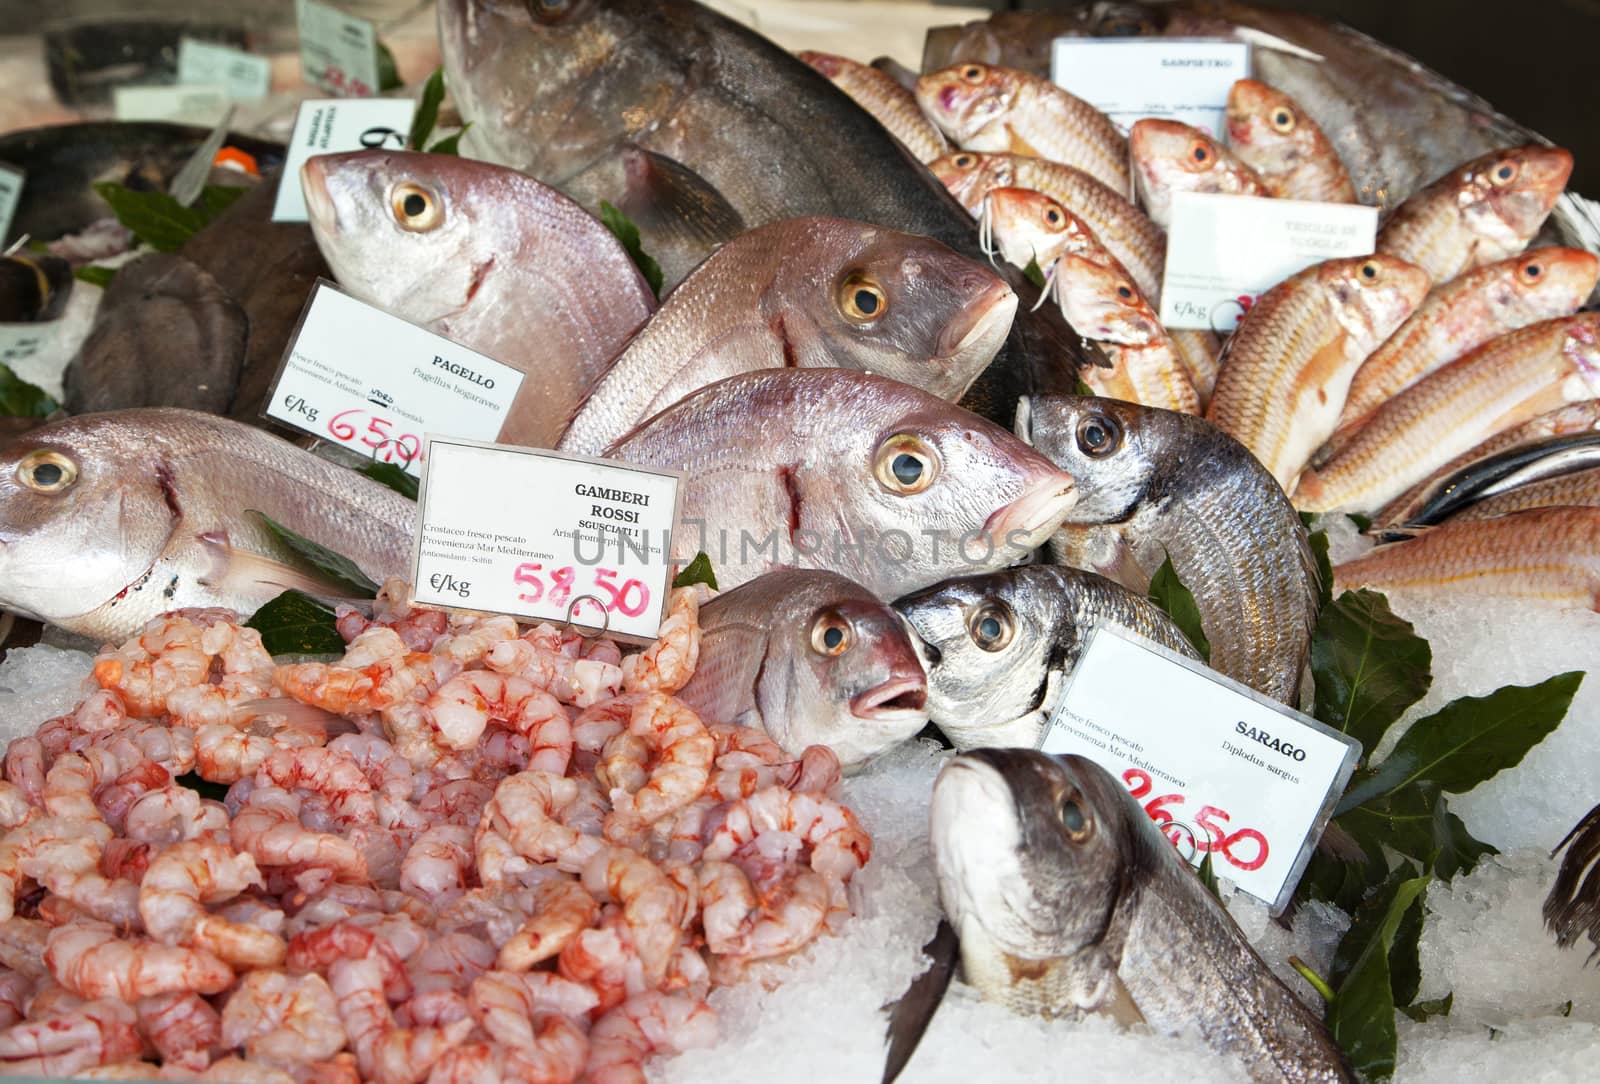 Fresh fish and clams in a market in Milan